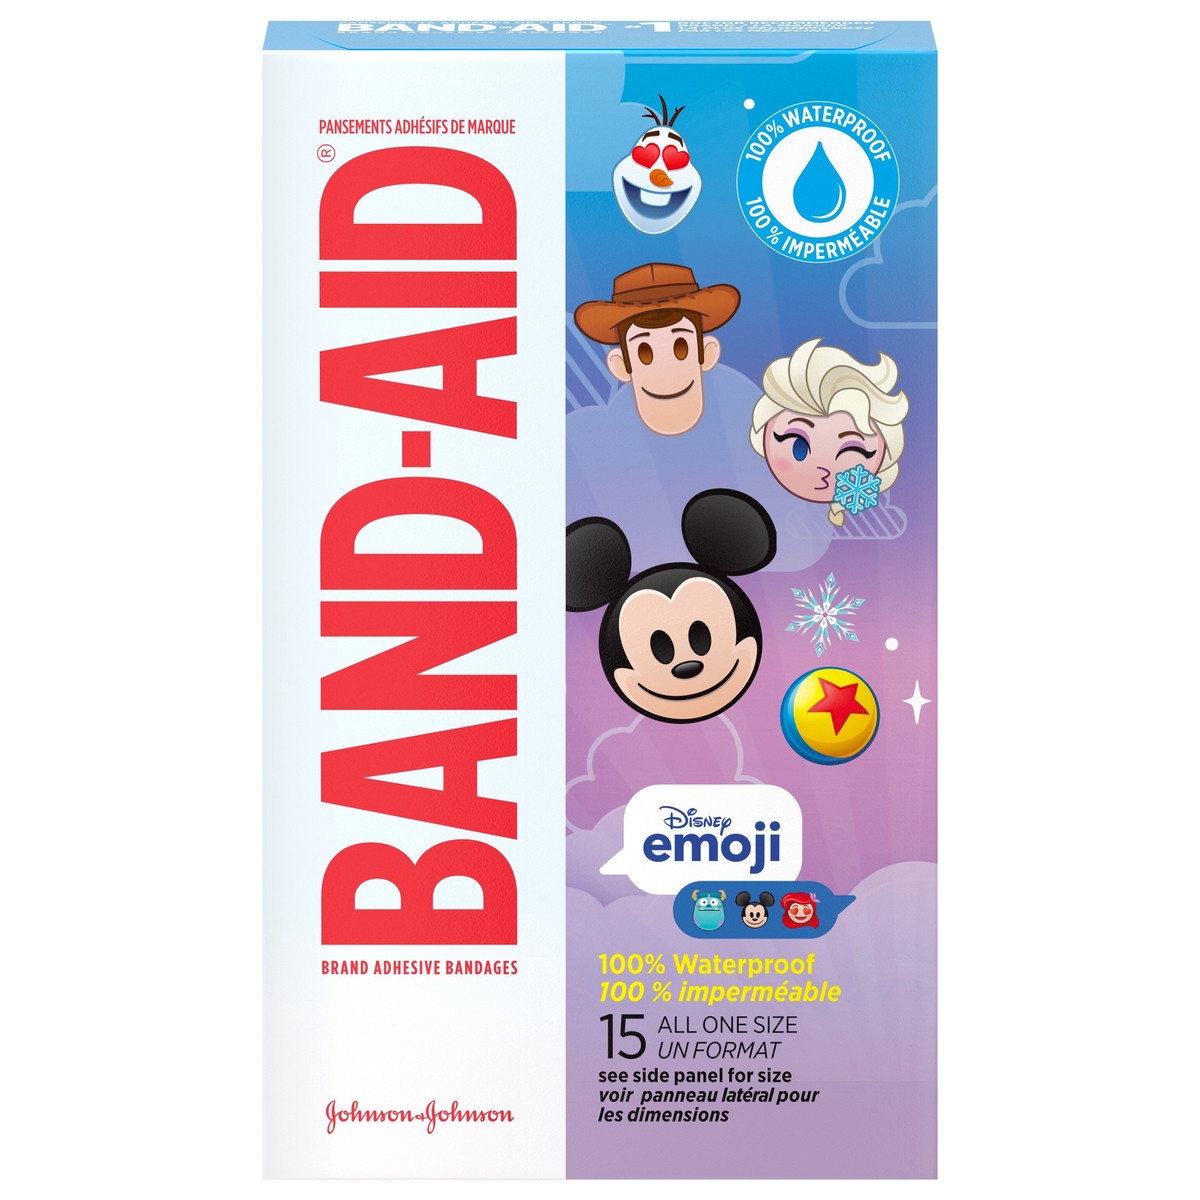 slide 1 of 7, BAND-AID Adhesive Bandages for Minor Cuts & Scrapes, 100% Waterproof Wound Care Bandages for Kids and Toddlers Featuring Disney Emoji Characters, All One Size, 15 ct, 15 ct